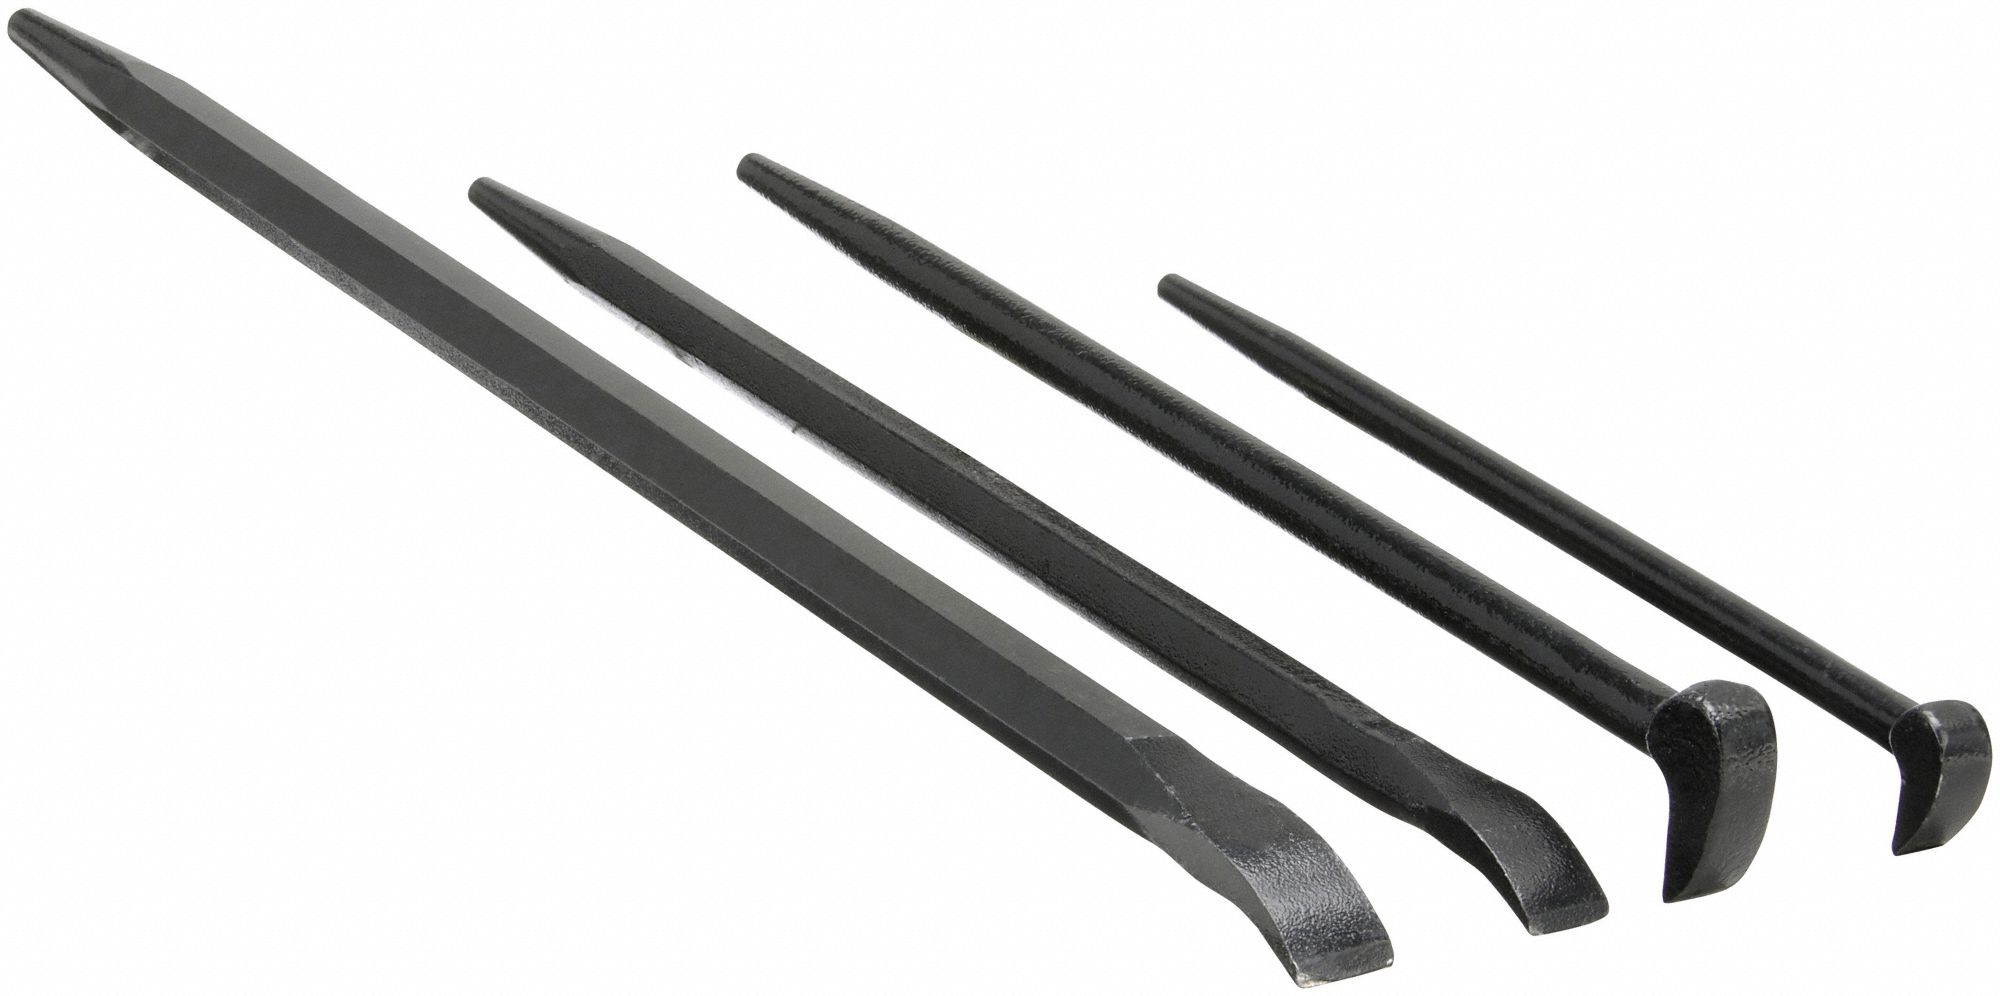 PRY BAR,CURVED,HIGH CARBON STEEL,4 PCS.